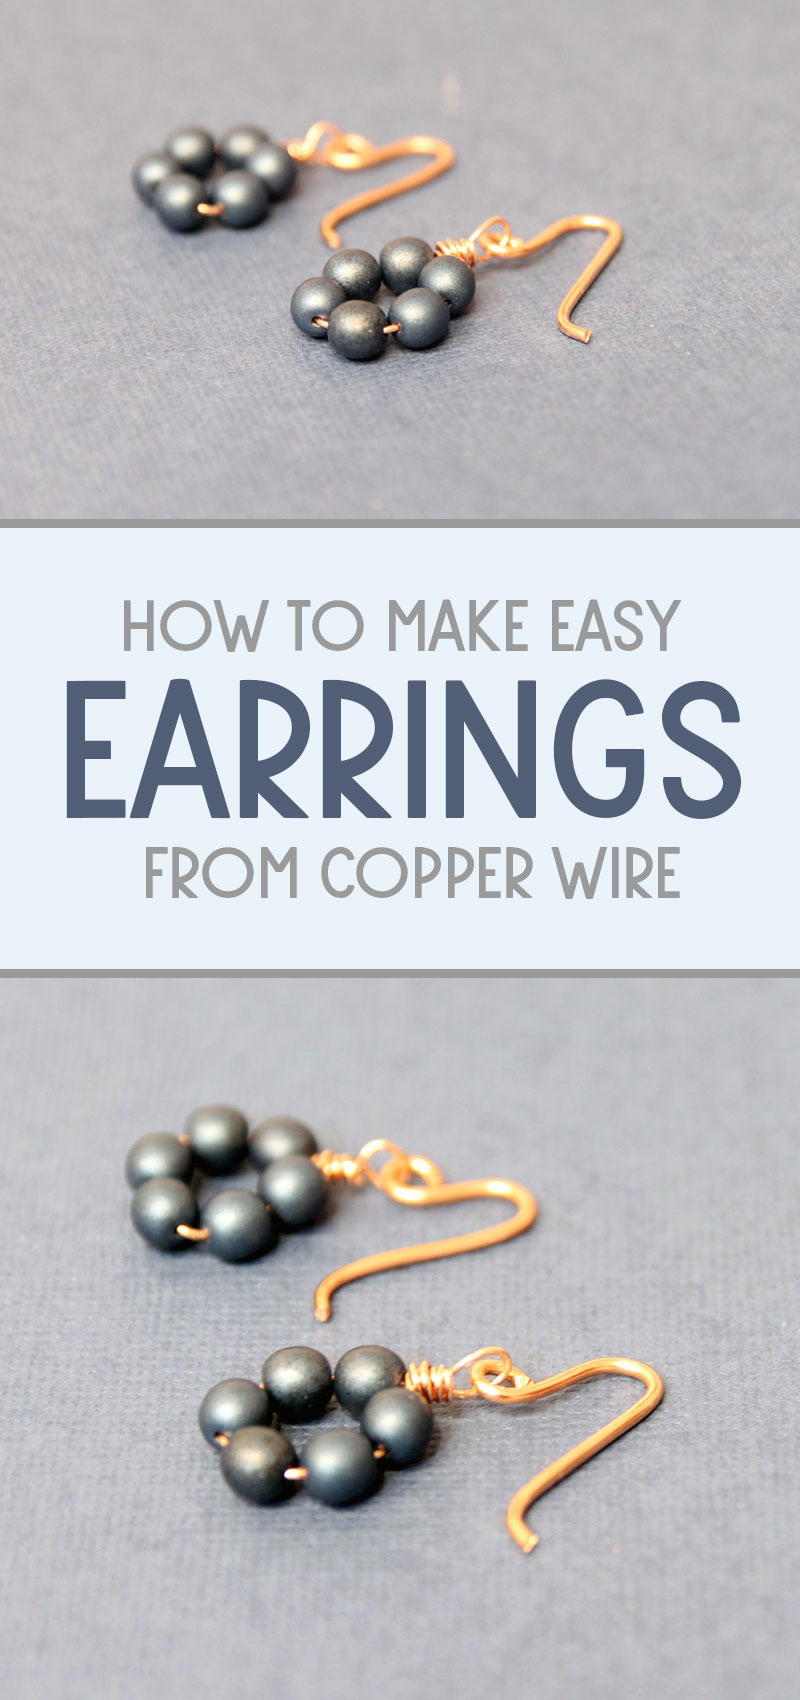 how to make earwires - final project collage with grayish blue background images